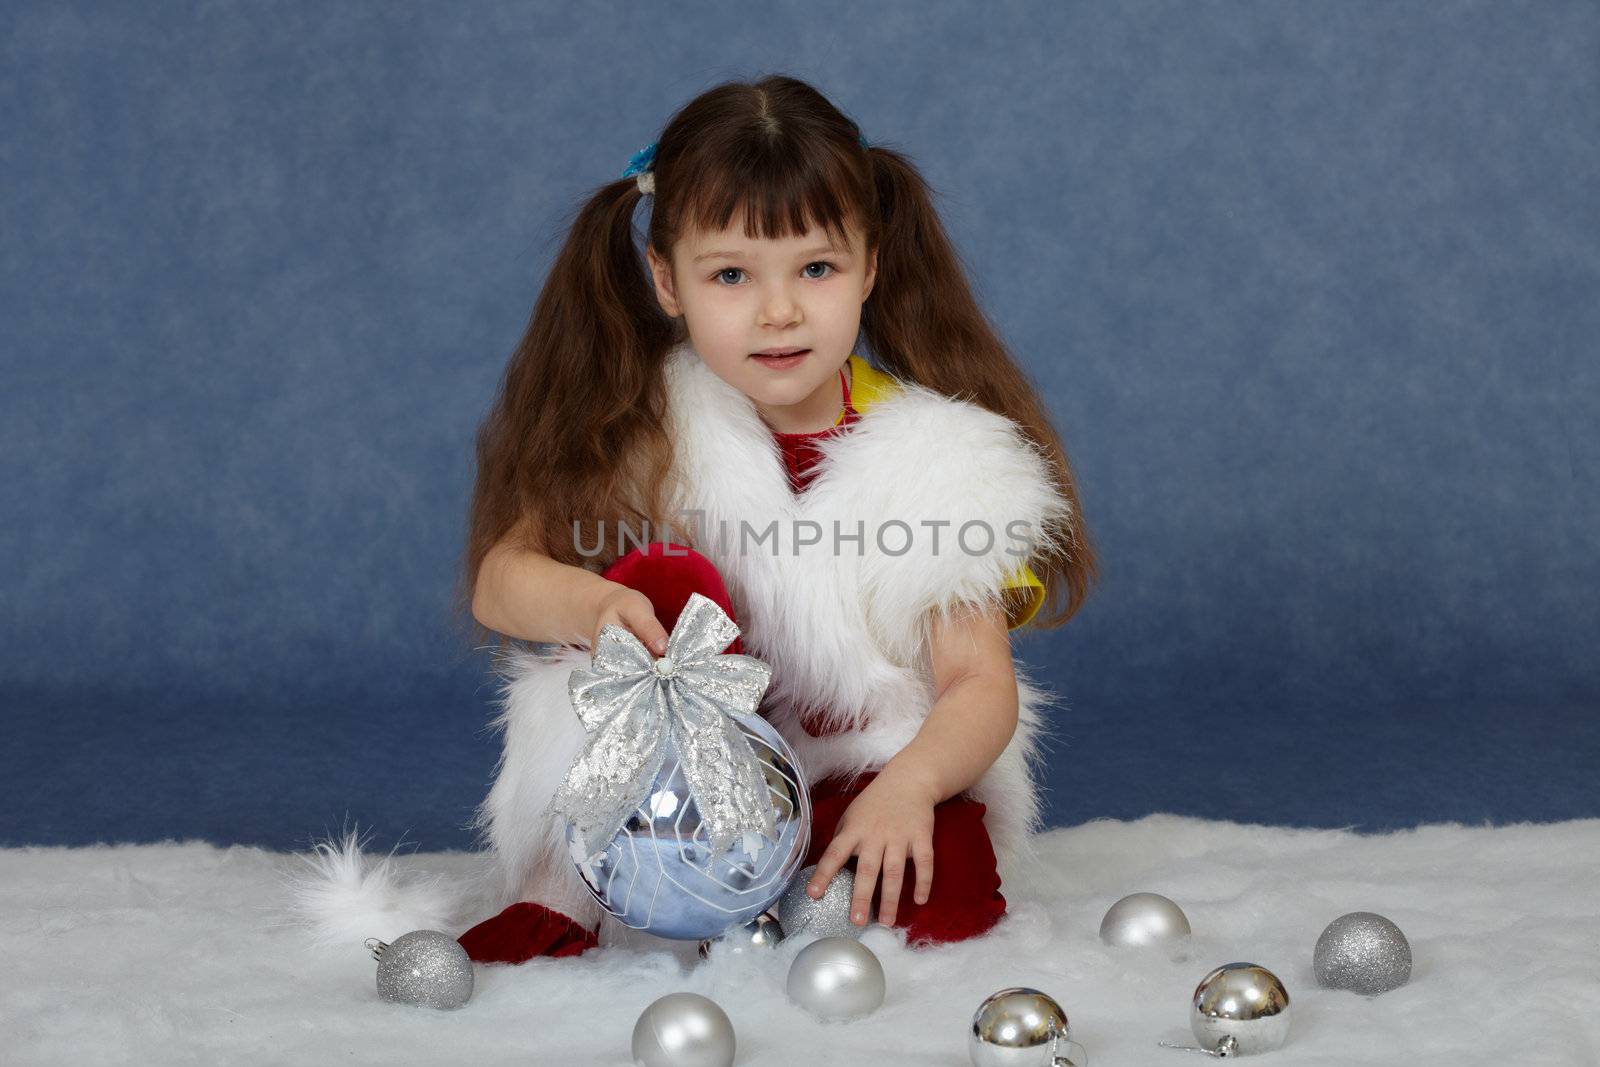 The child sits on a blue background with Christmas tree ball